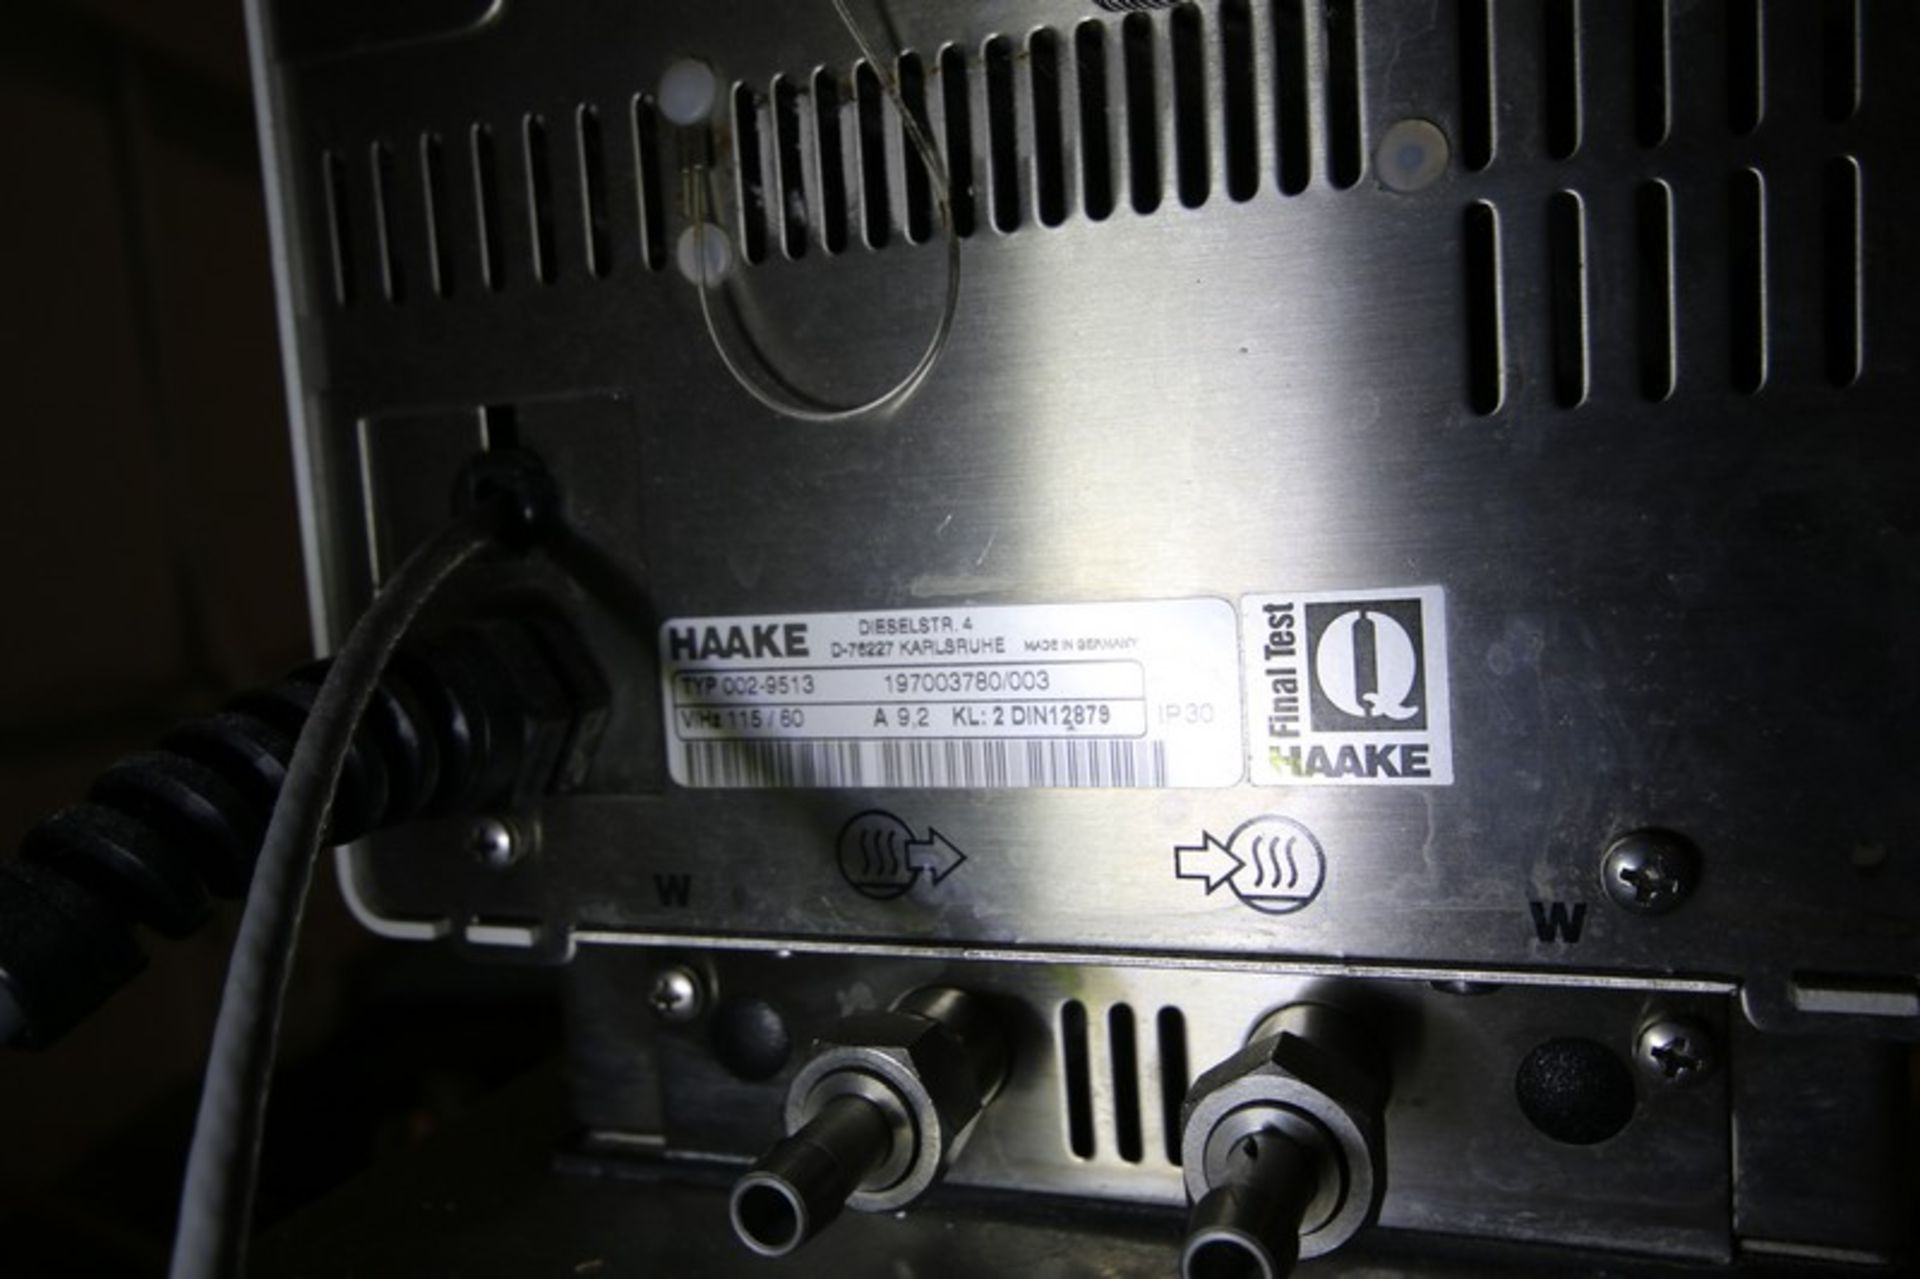 Haake F6 Circulator with C25 Circulating Water Bath, Type 002-9838, SN 197003780/003, 115V, with - Image 4 of 5